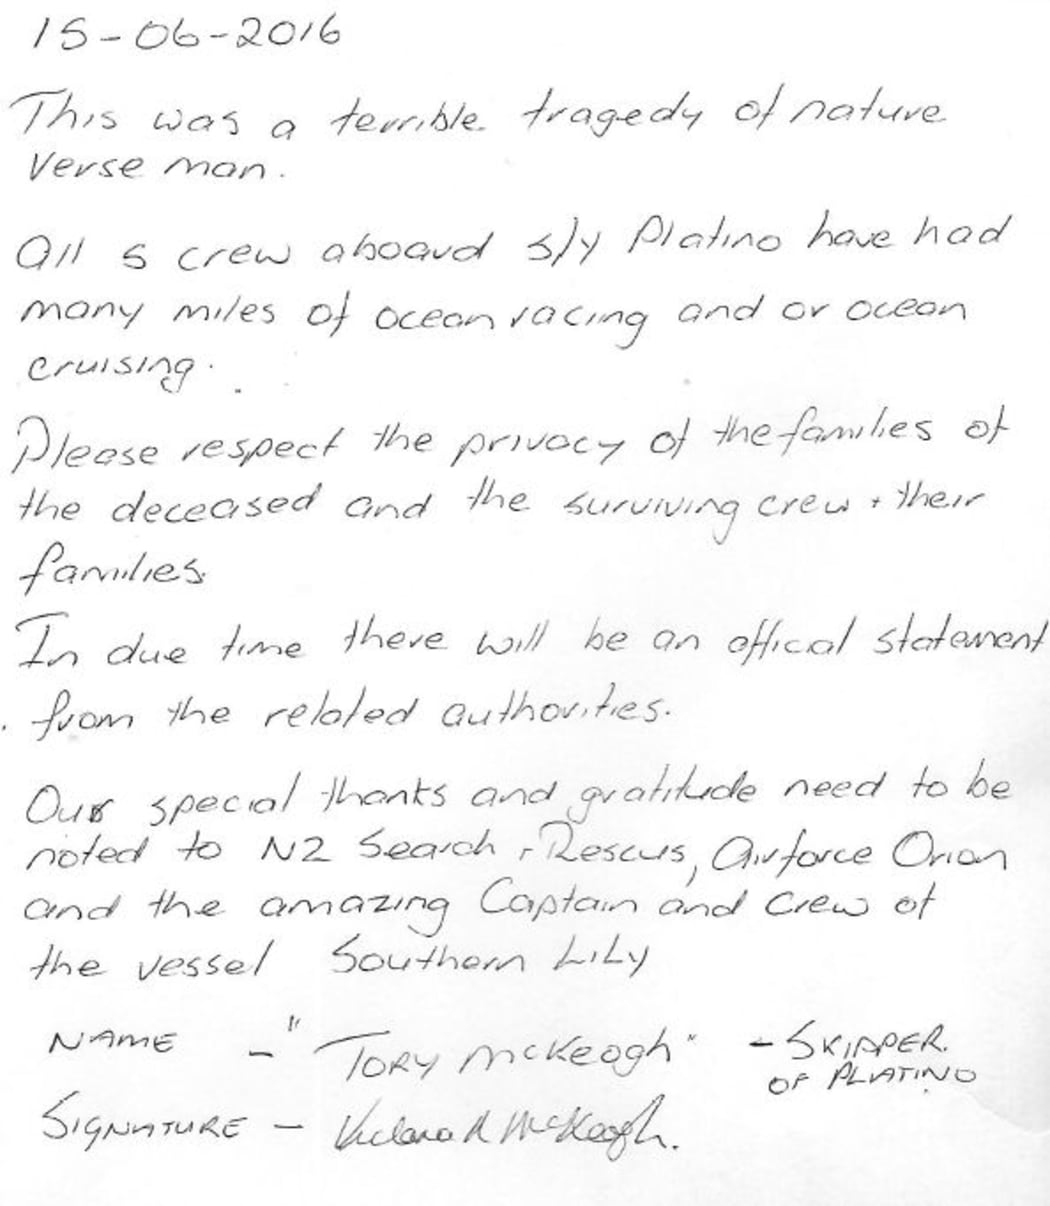 A copy of the handwritten statement penned by Platino survivor Tory McKeogh.